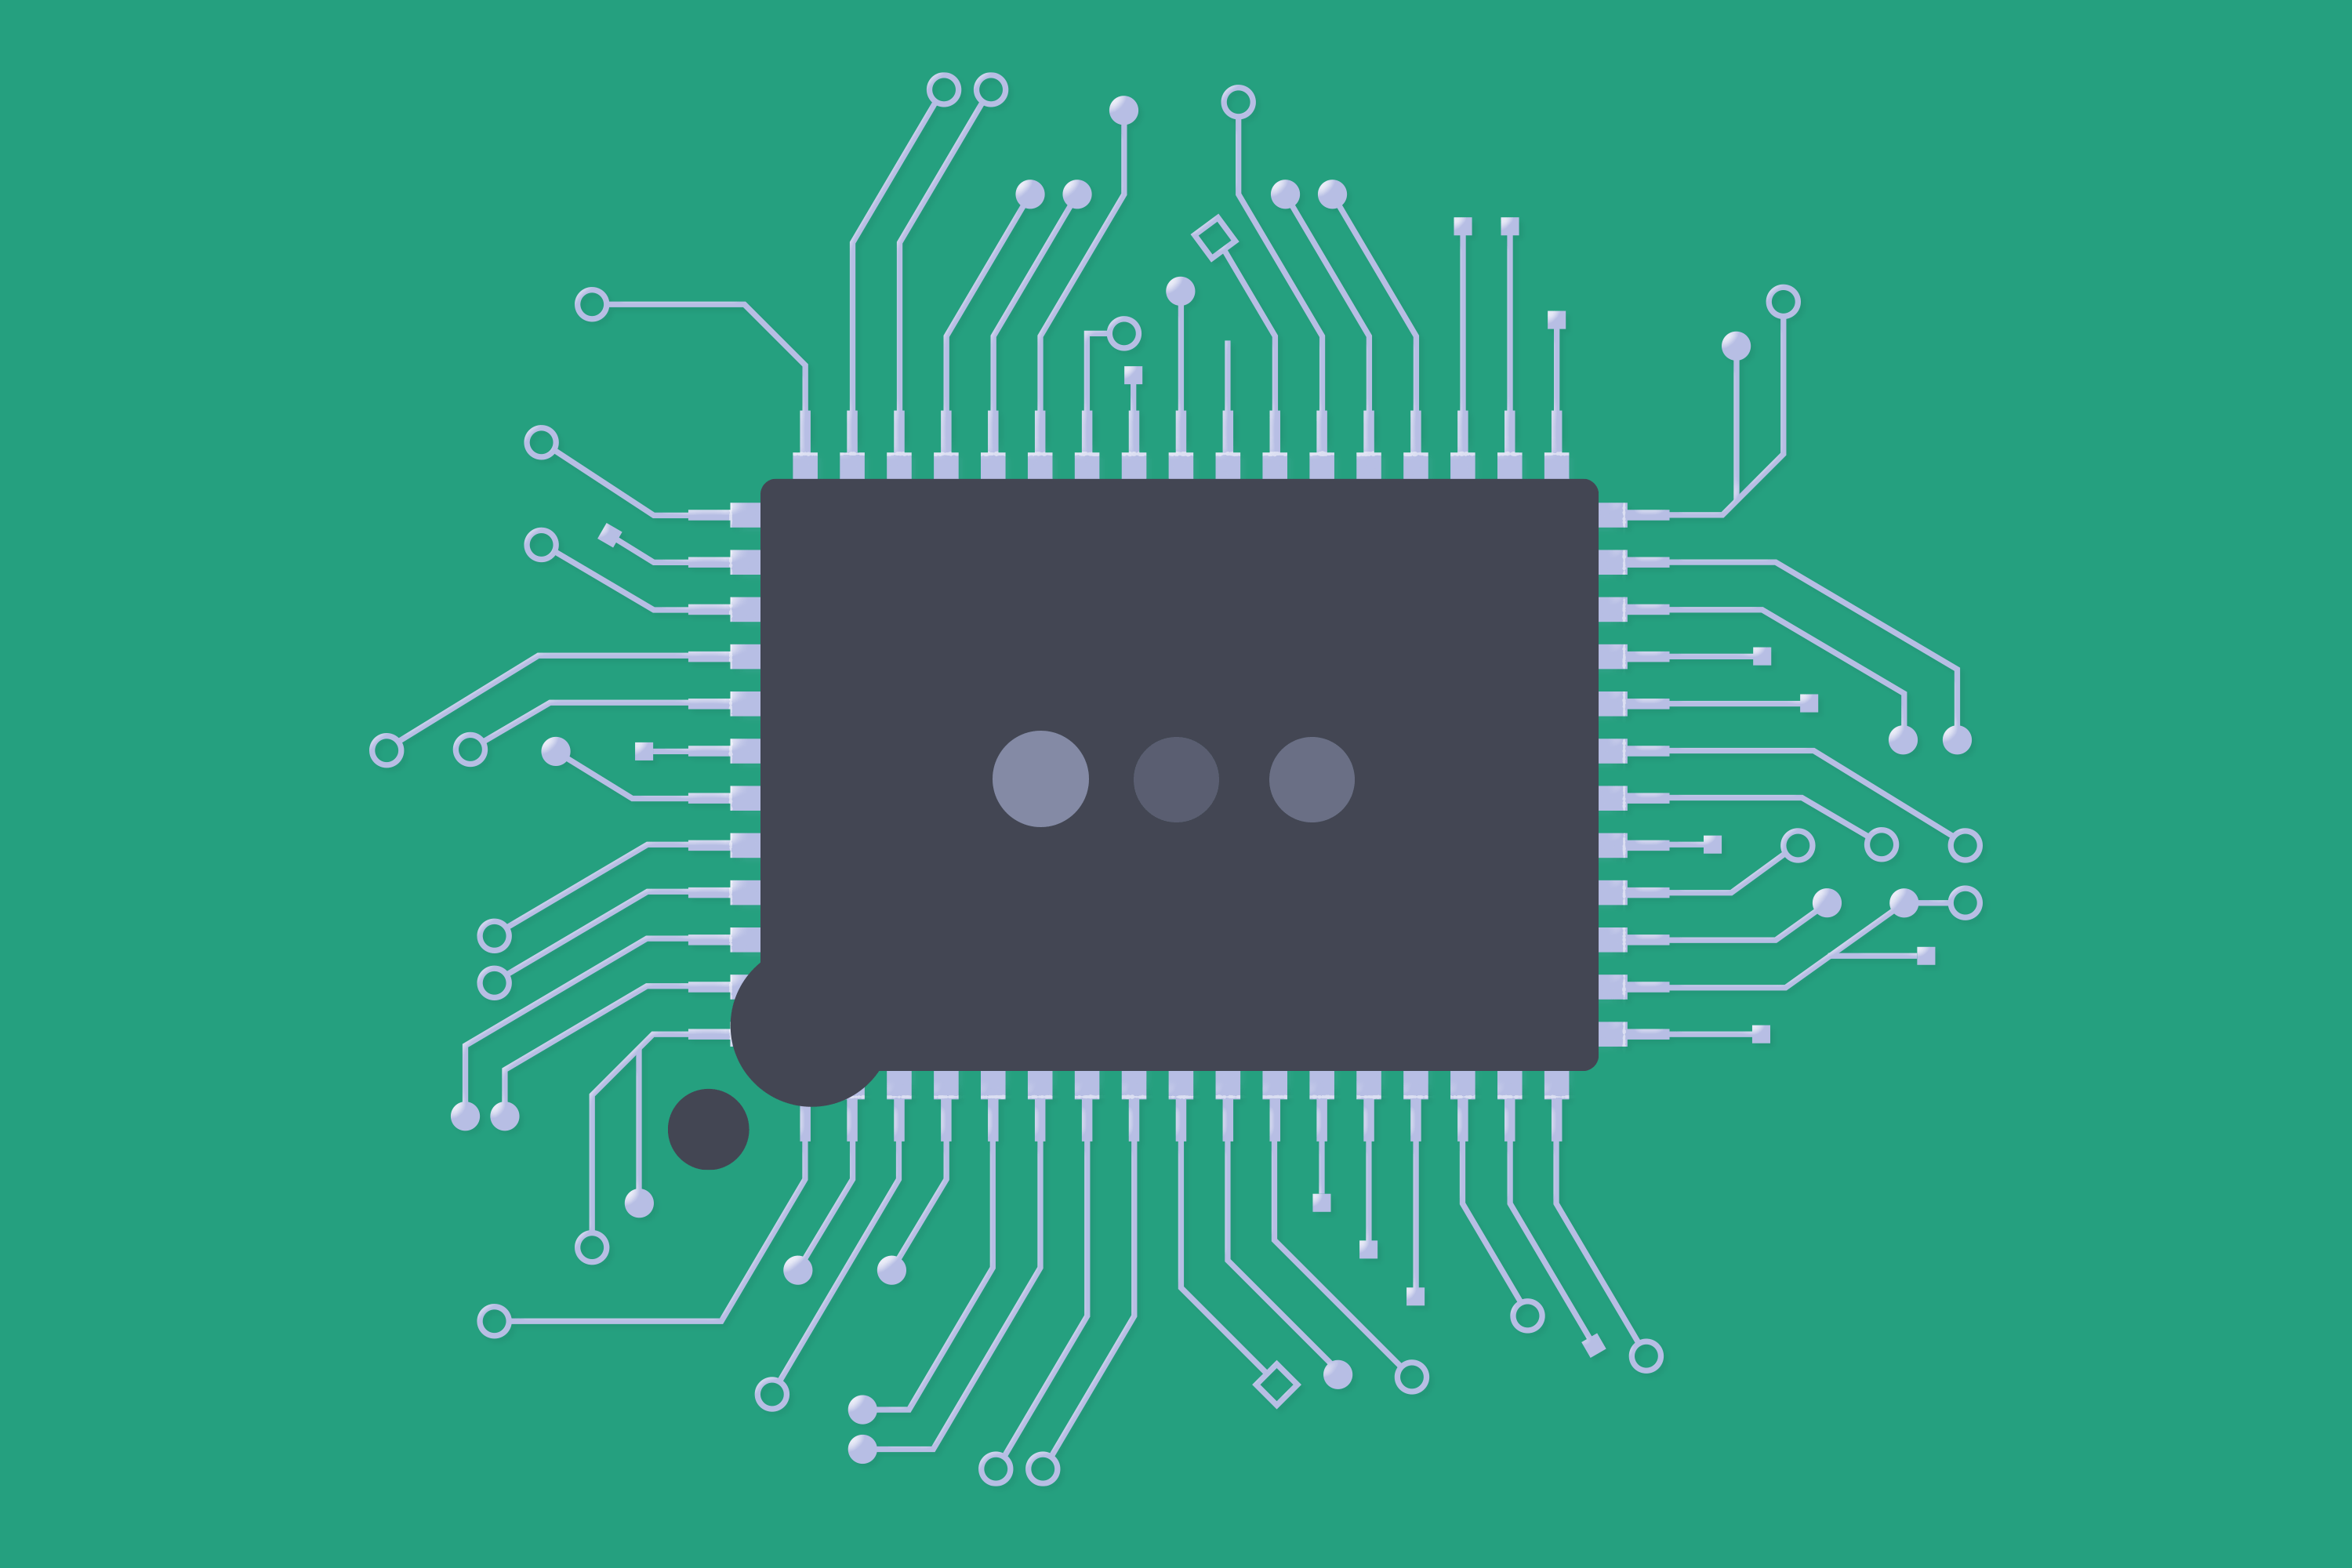 Illustration of a computer chip shaped like a text message with three animated dots showing the chip is typing.